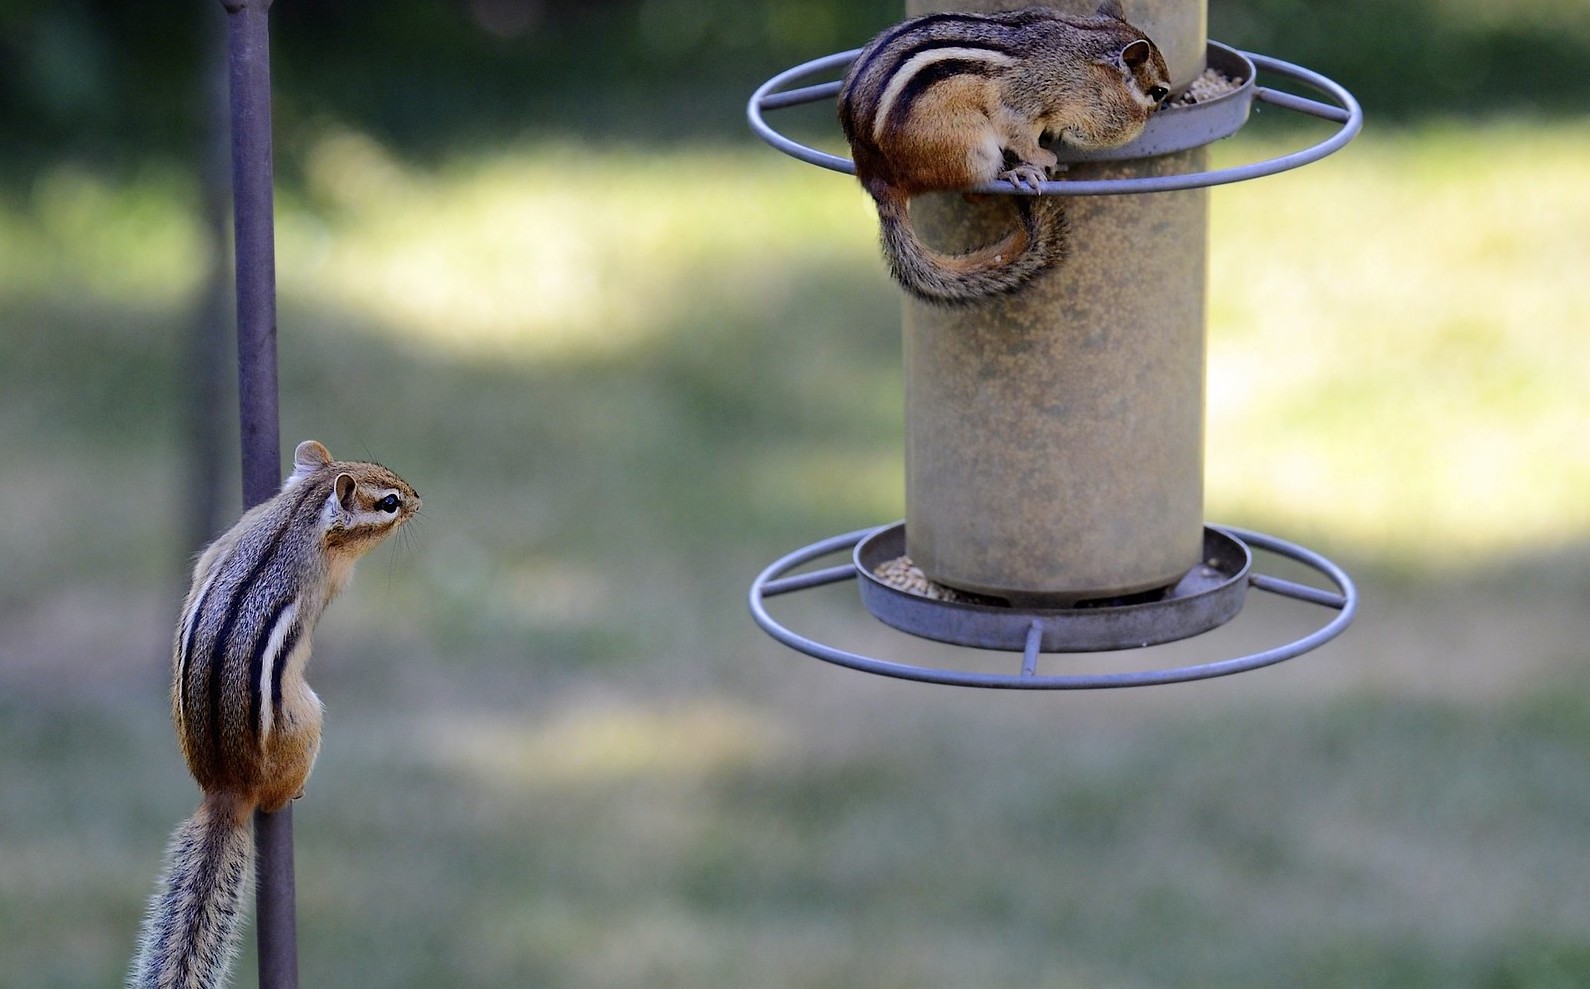 Take Down Your Feeders: Salmonella is Killing Songbirds